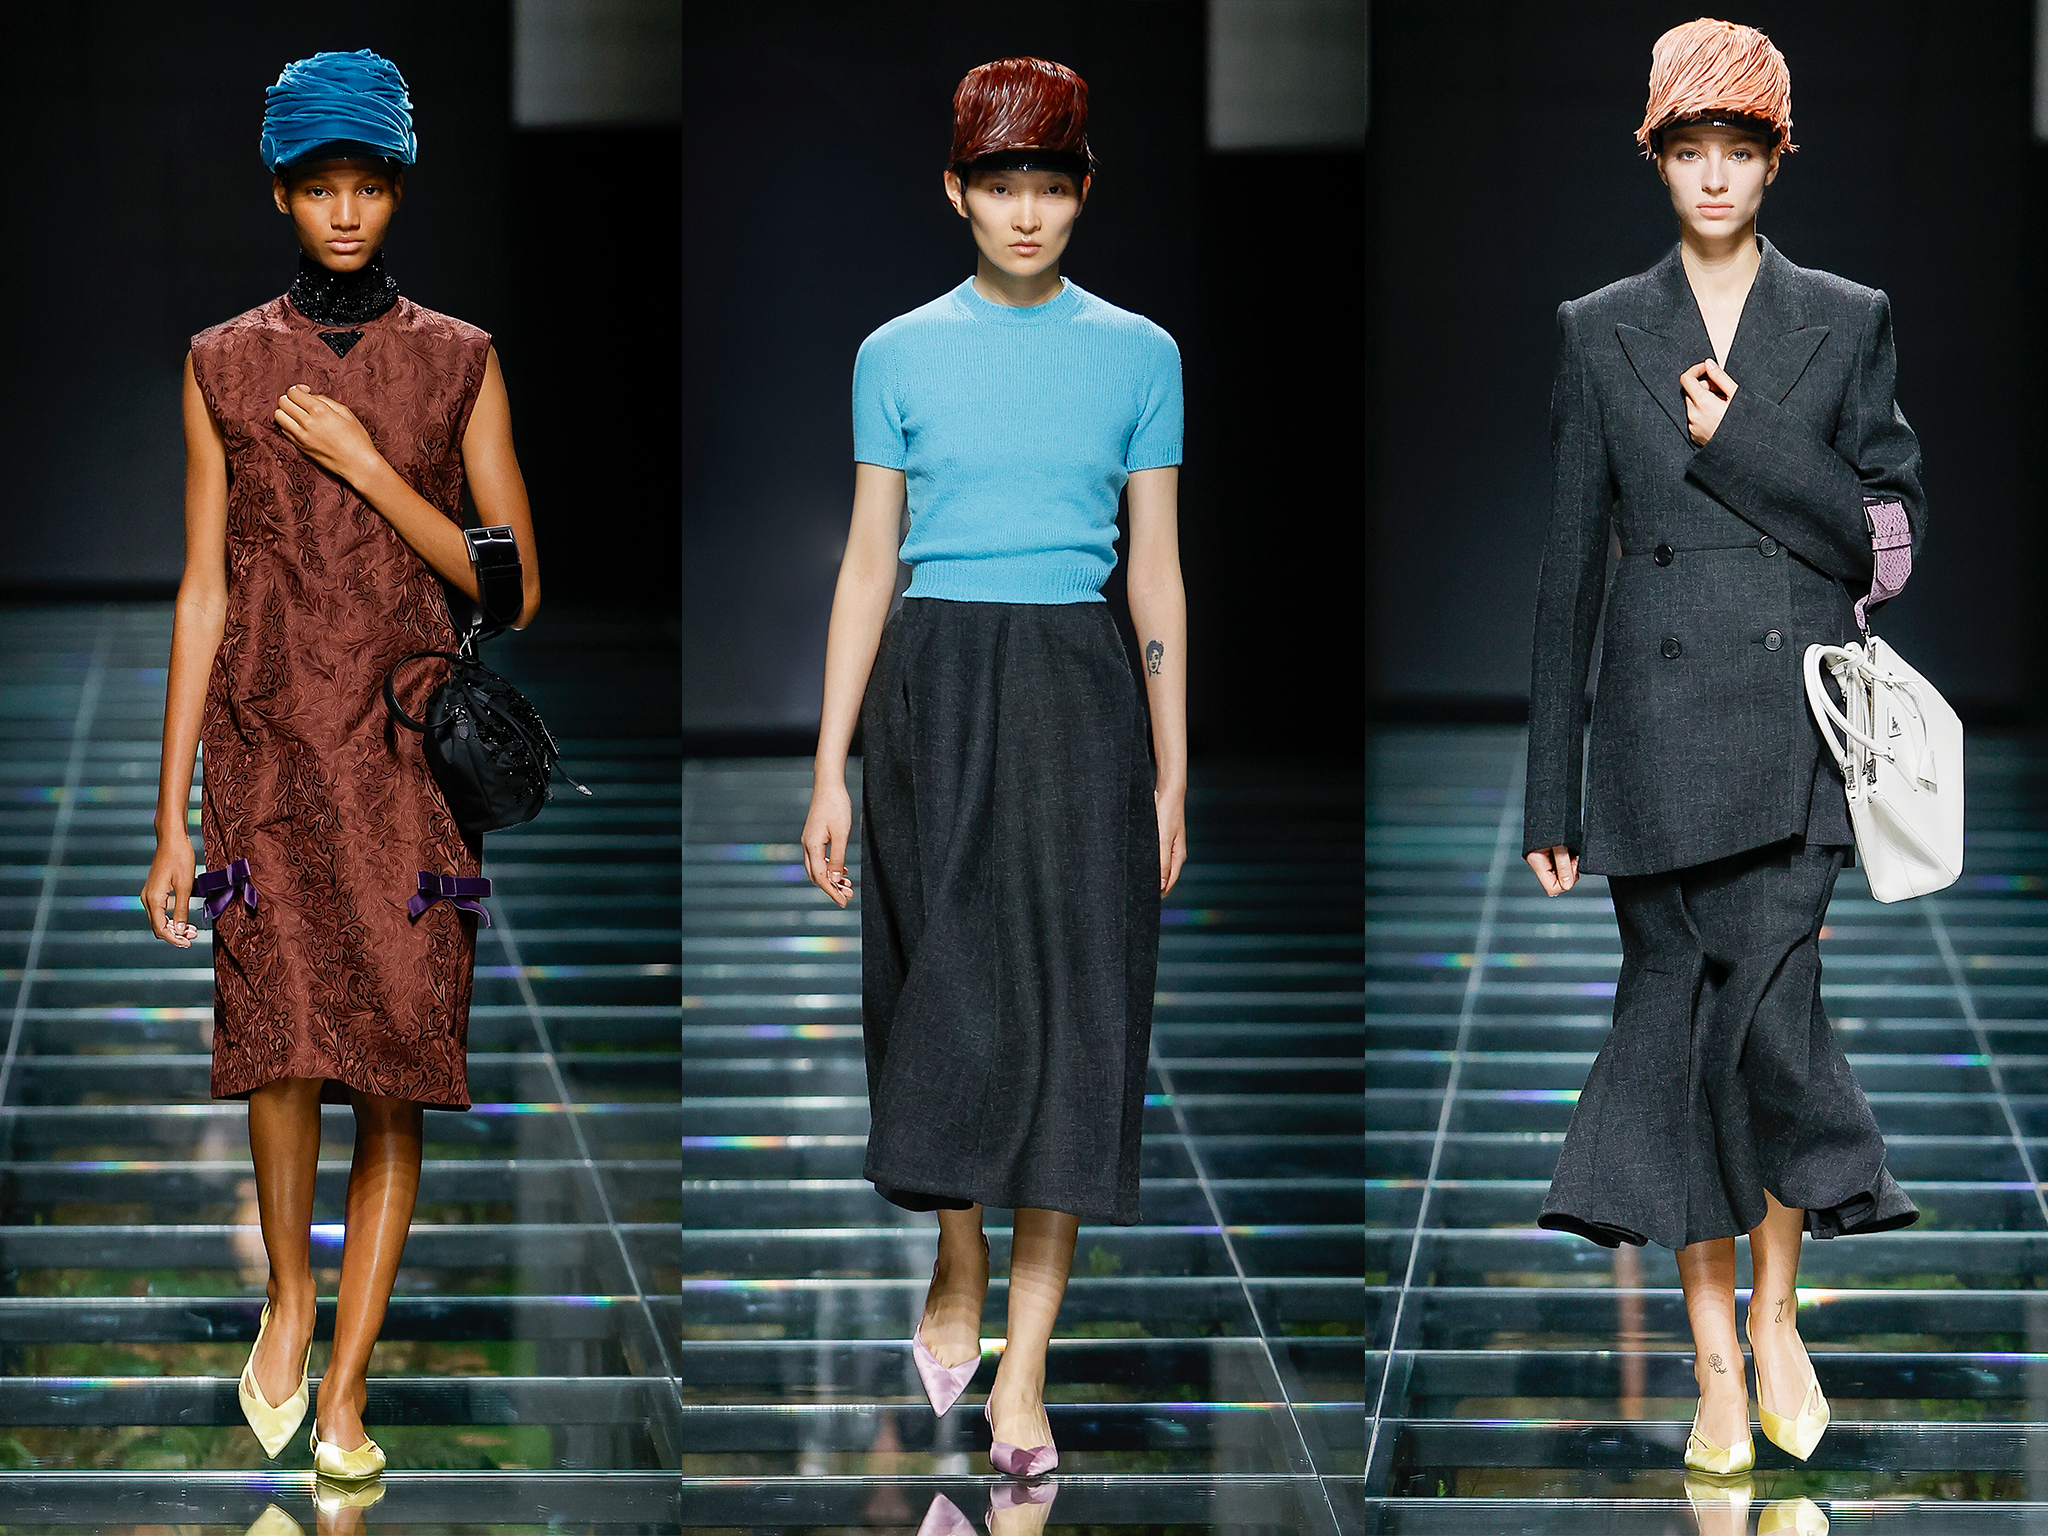 Prada’s AW24 show was full of statement-making styles, yet hats stood out as next season’s must-have accessory